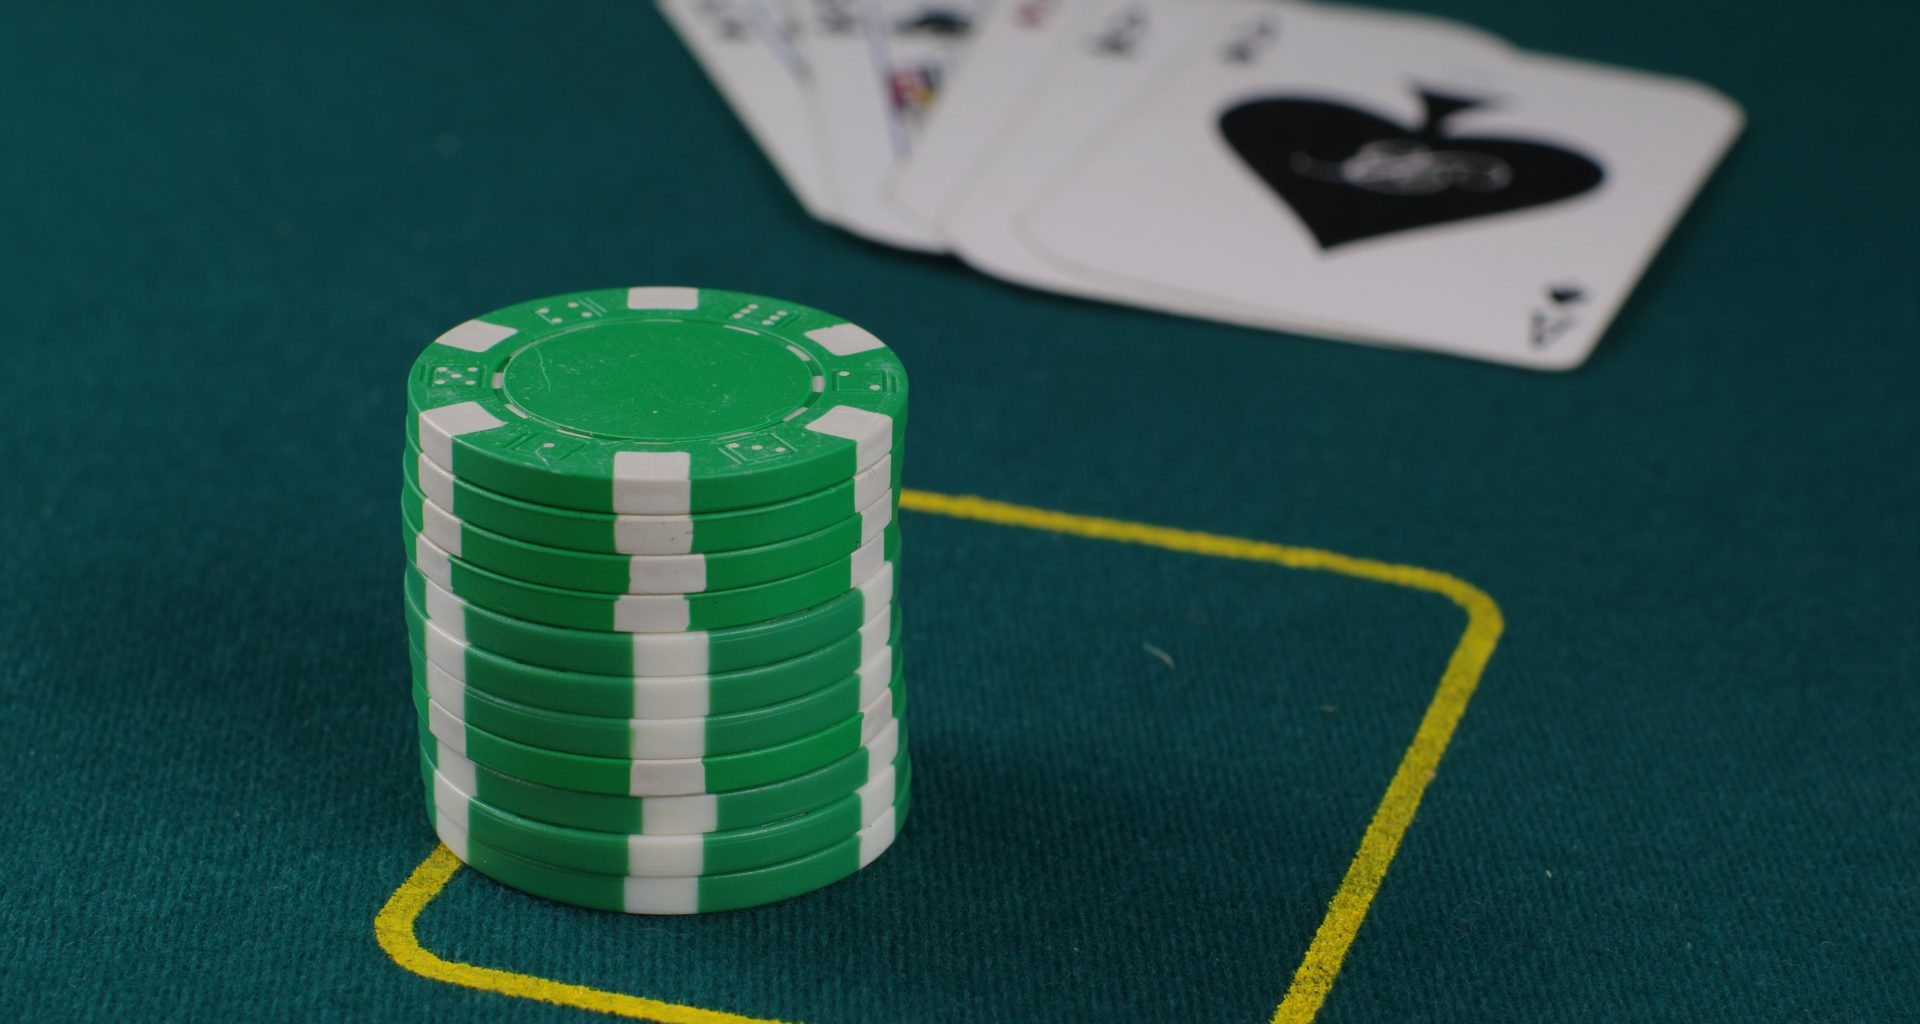 A stack of poker chips on top of a green table